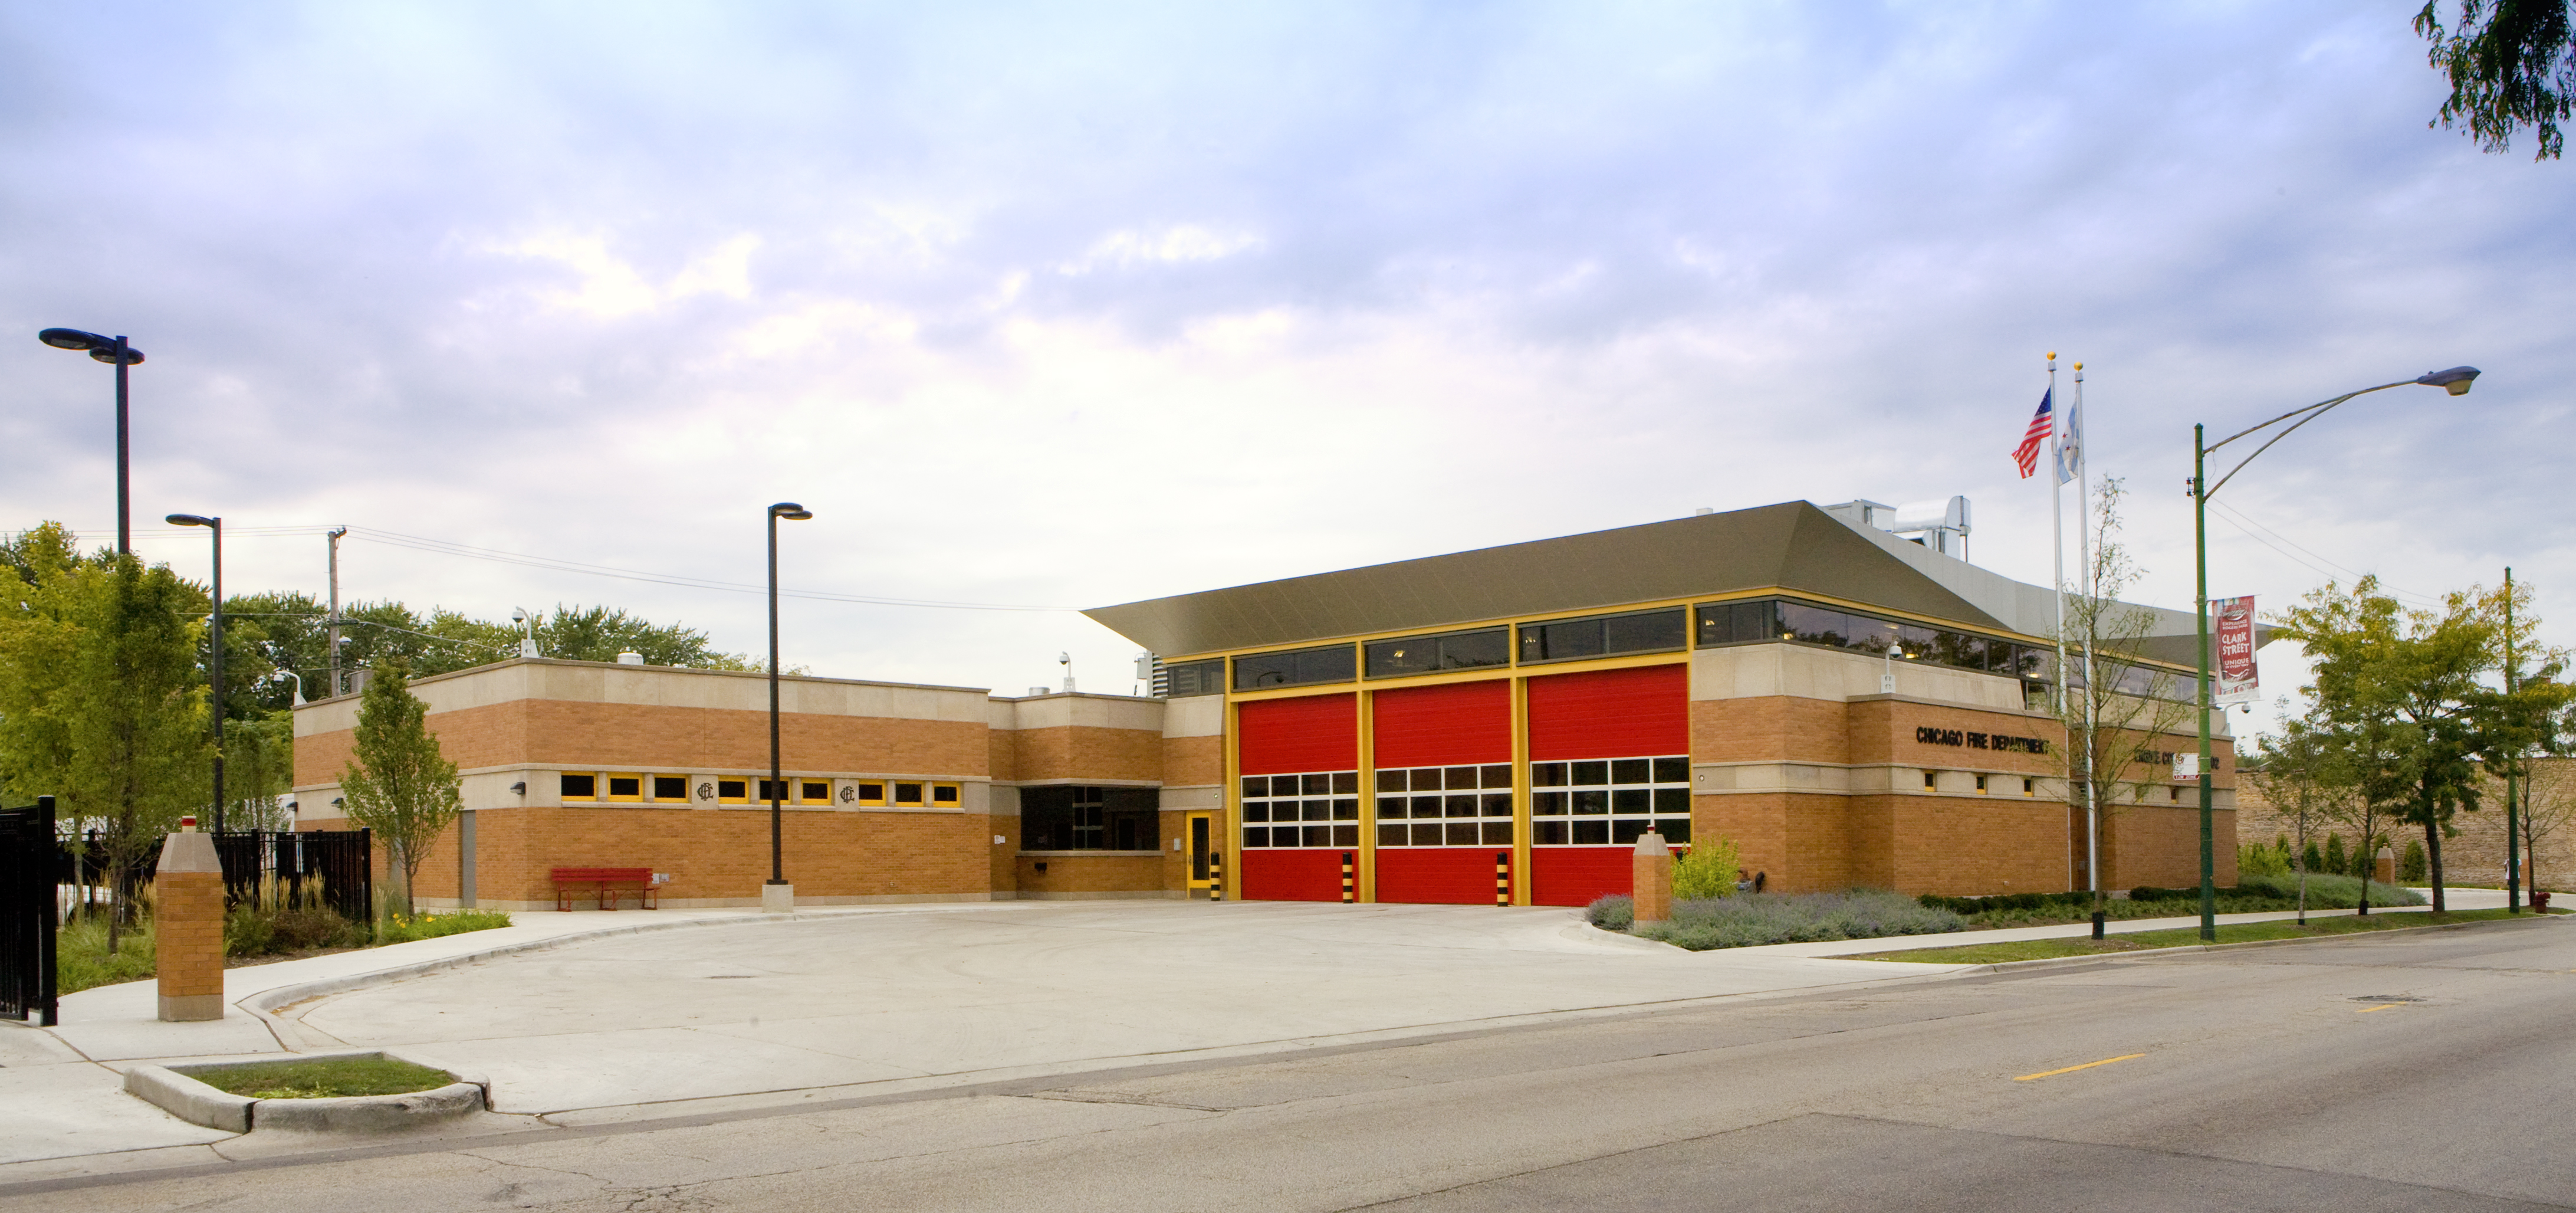 Chicago Fire Department station for Engine 102